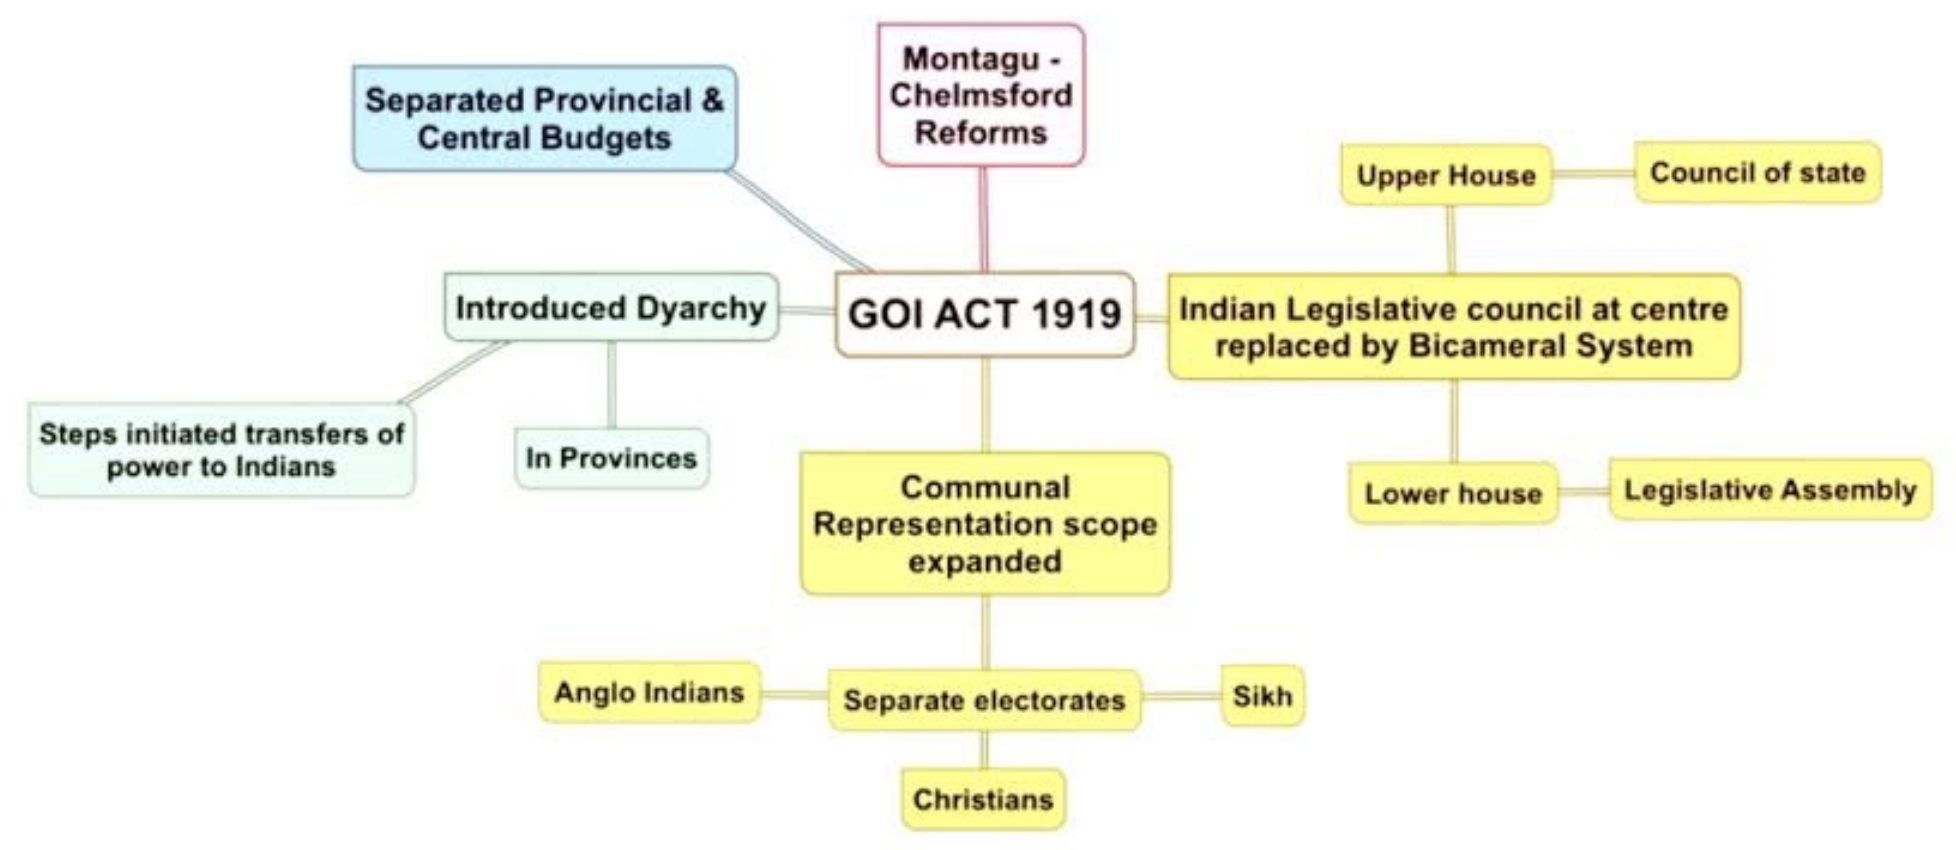  Government of India Act, 1919 (Montagu-Chelmsford Reforms) | UPSC